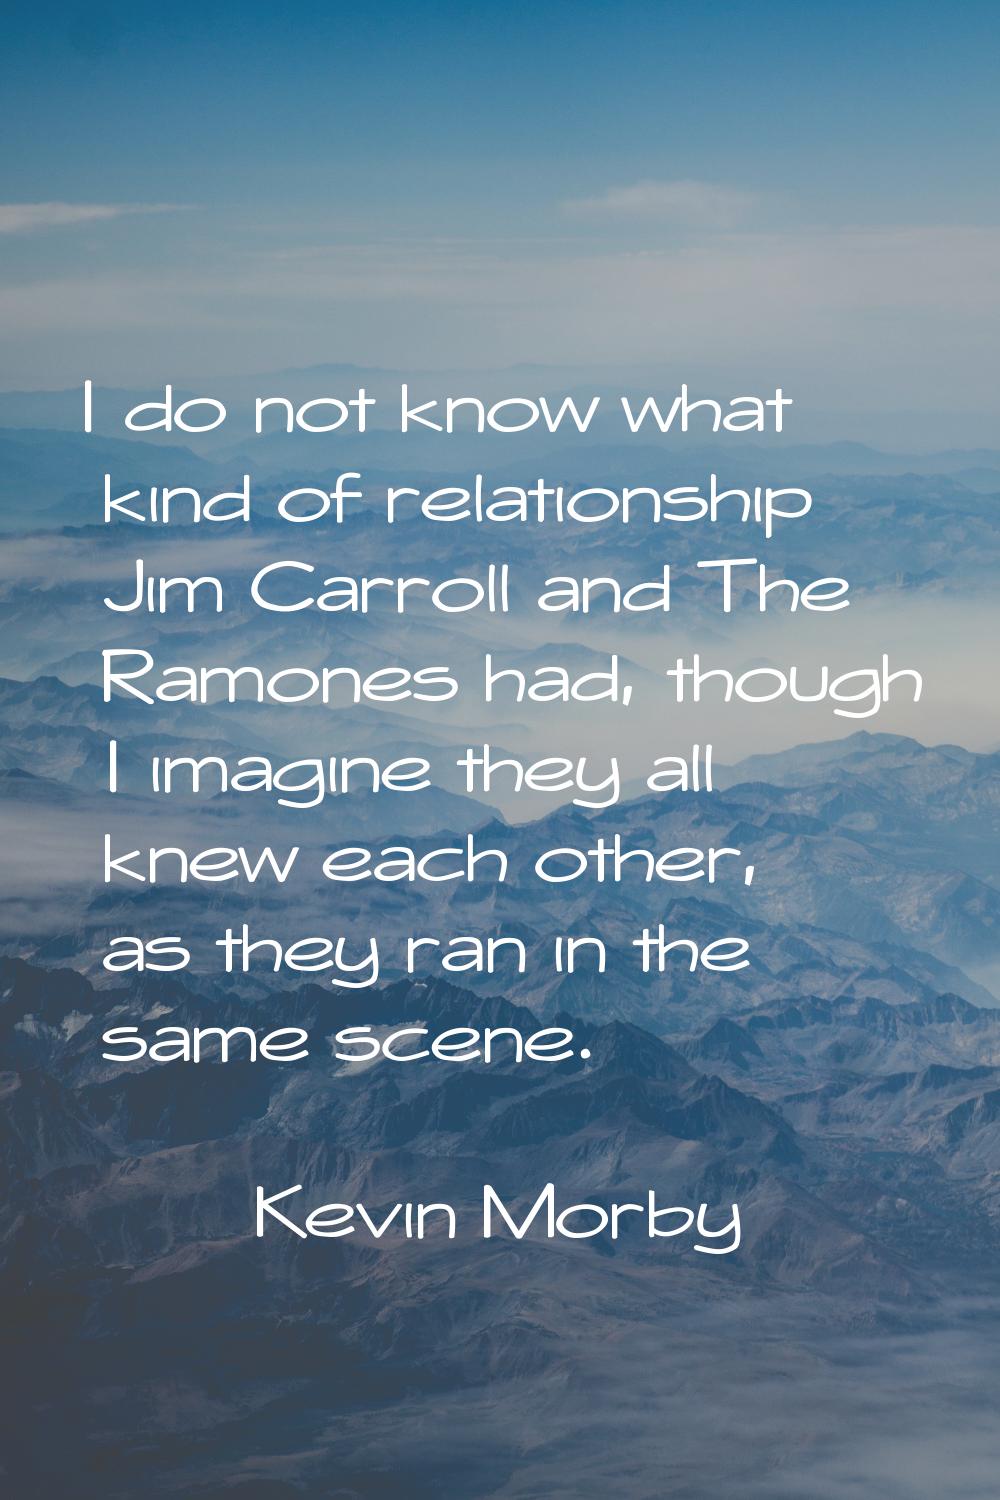 I do not know what kind of relationship Jim Carroll and The Ramones had, though I imagine they all 